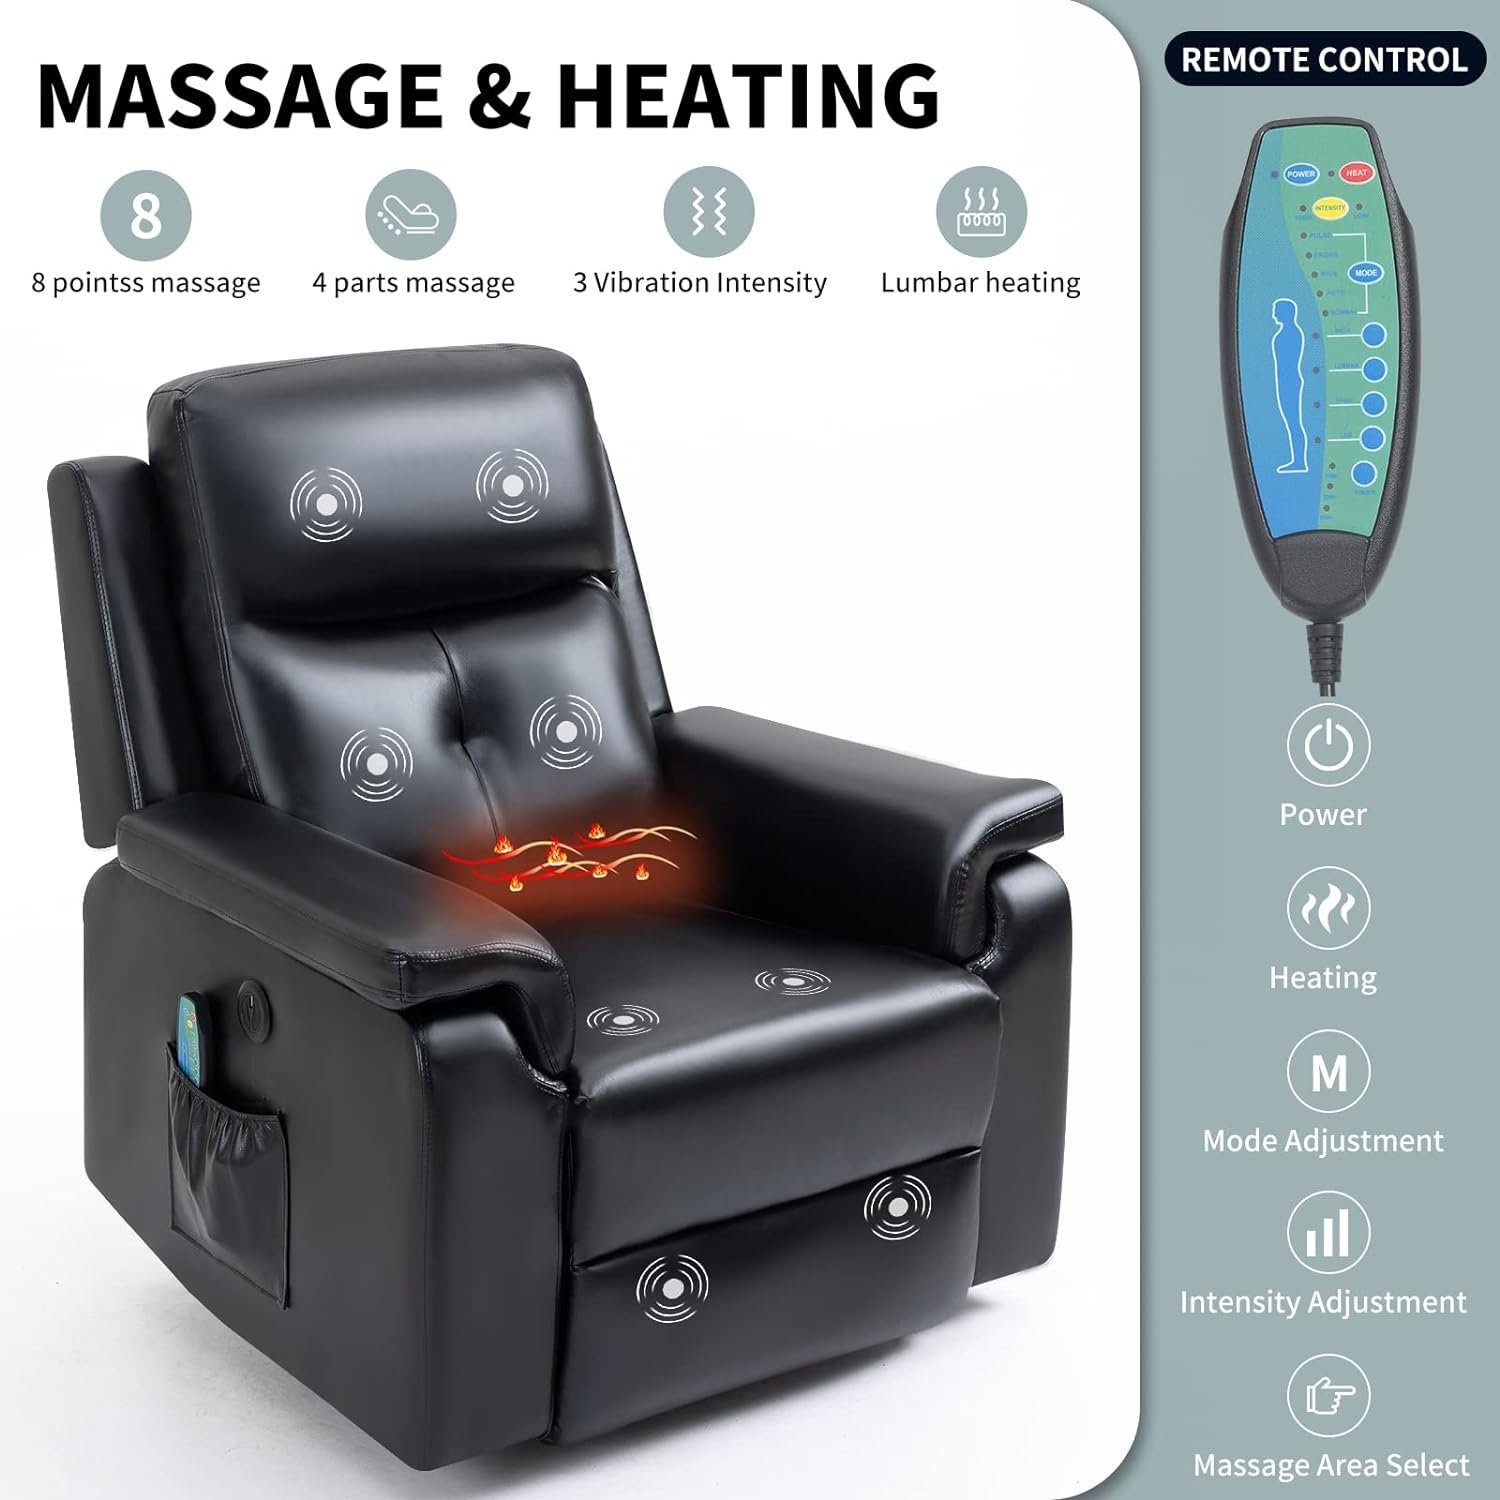 AVAWING Power Lift Recliner Chair for Elderly, Leather Electric Massage Recliner Chair w/Heat, Side Pocket, Remote Control, USB Charge Port for Bedroom, Living Room, Dark Black…